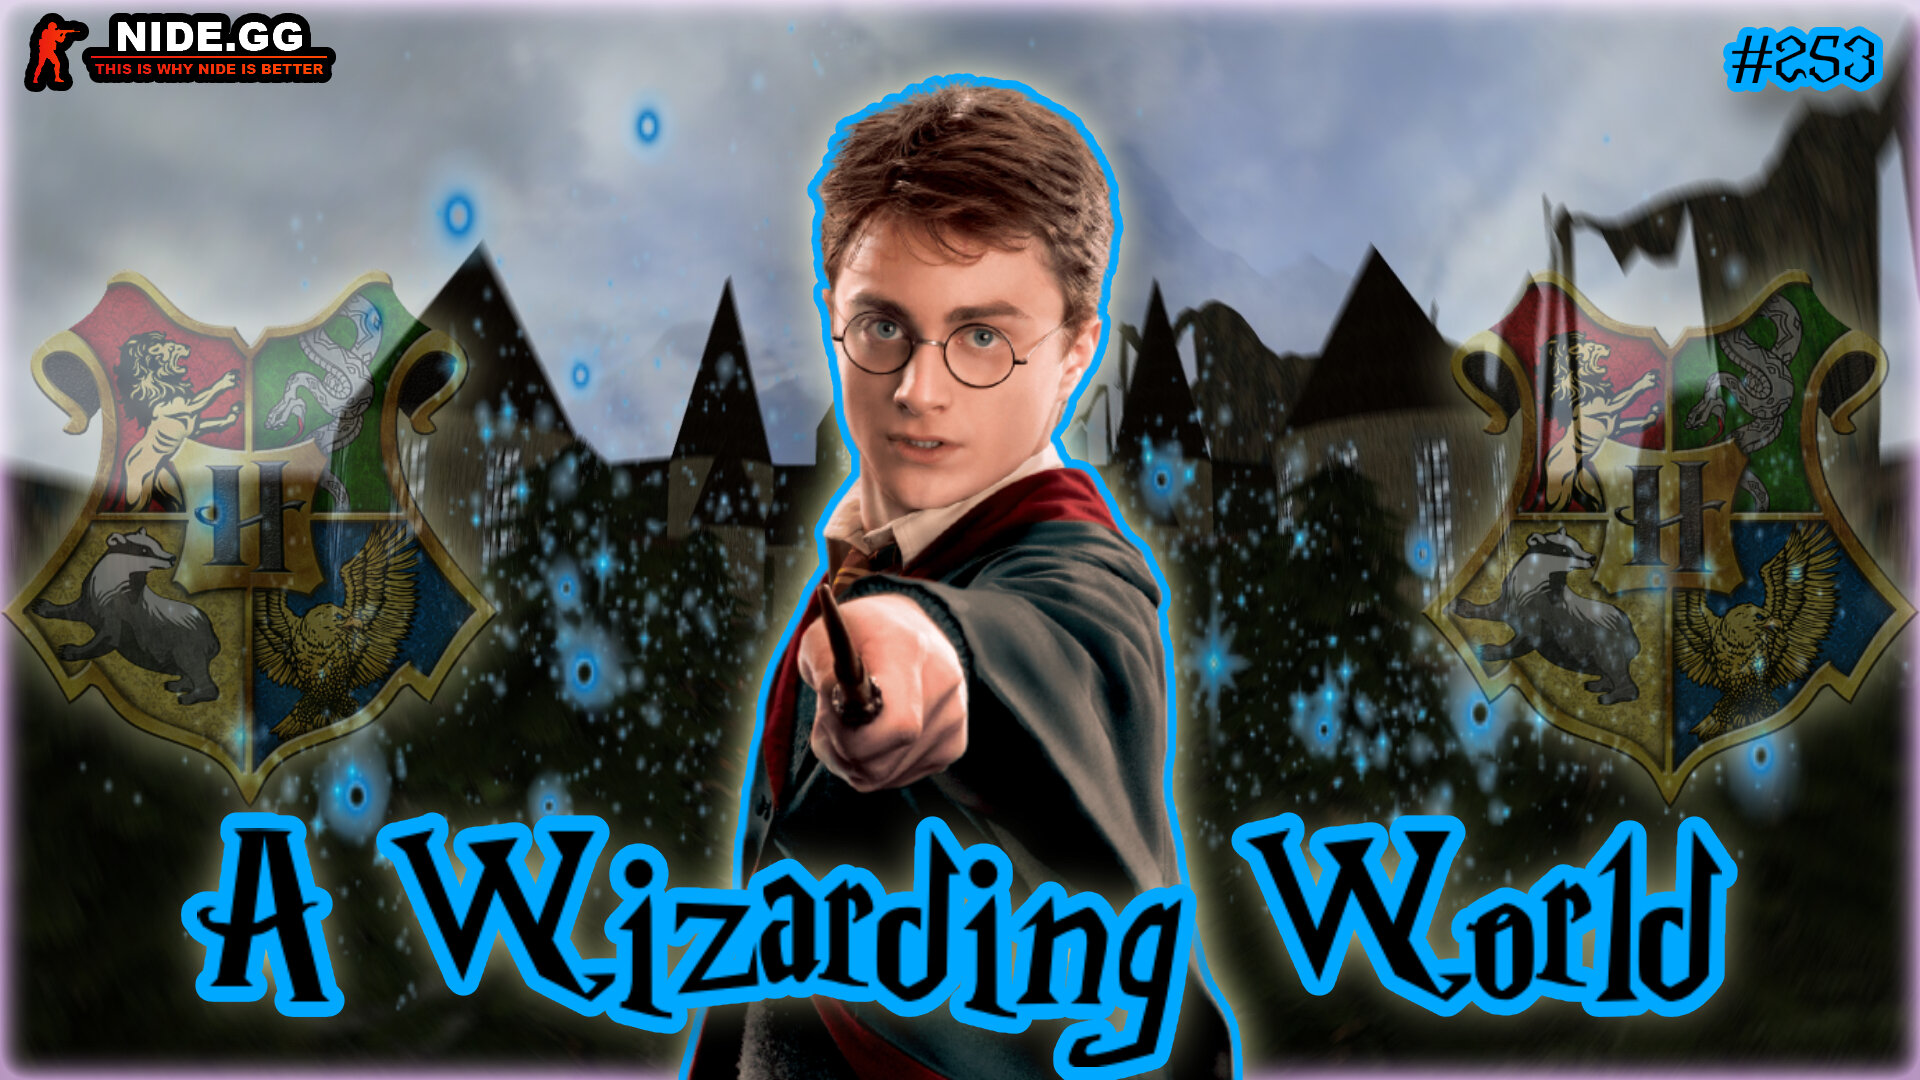 More information about "CS:S ZE Event #253 - A Wizarding World"